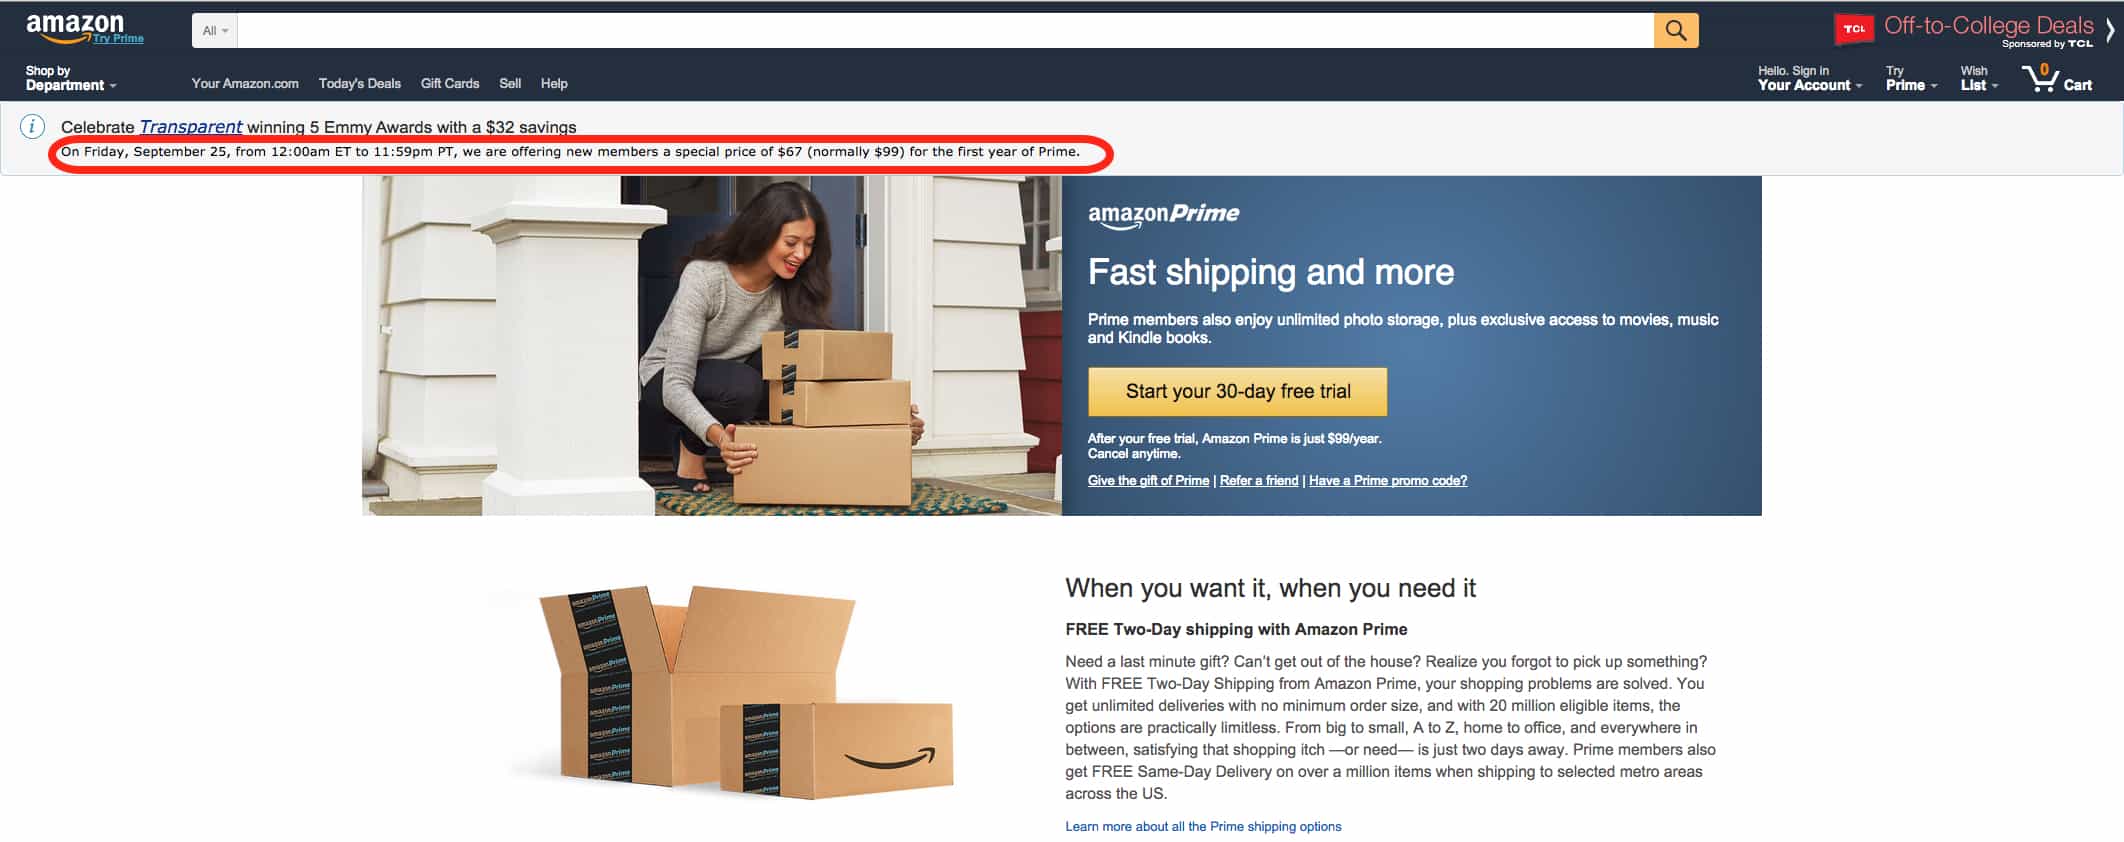 Amazon Prime, Traveling Well For Less